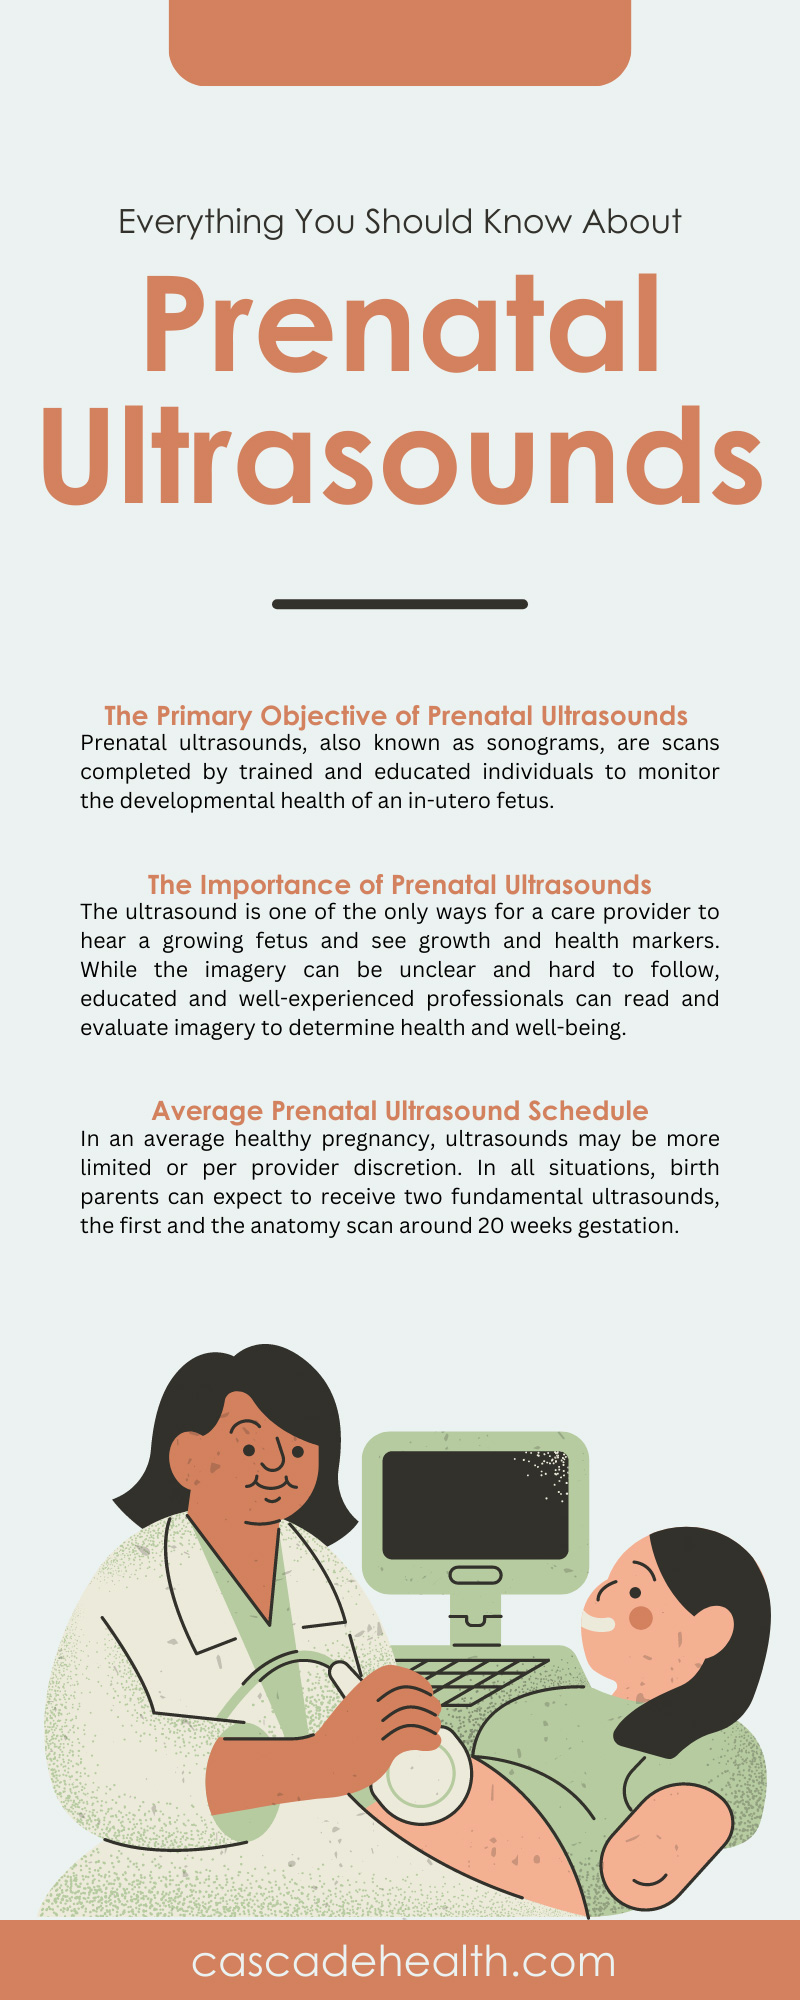 Everything You Should Know About Prenatal Ultrasounds